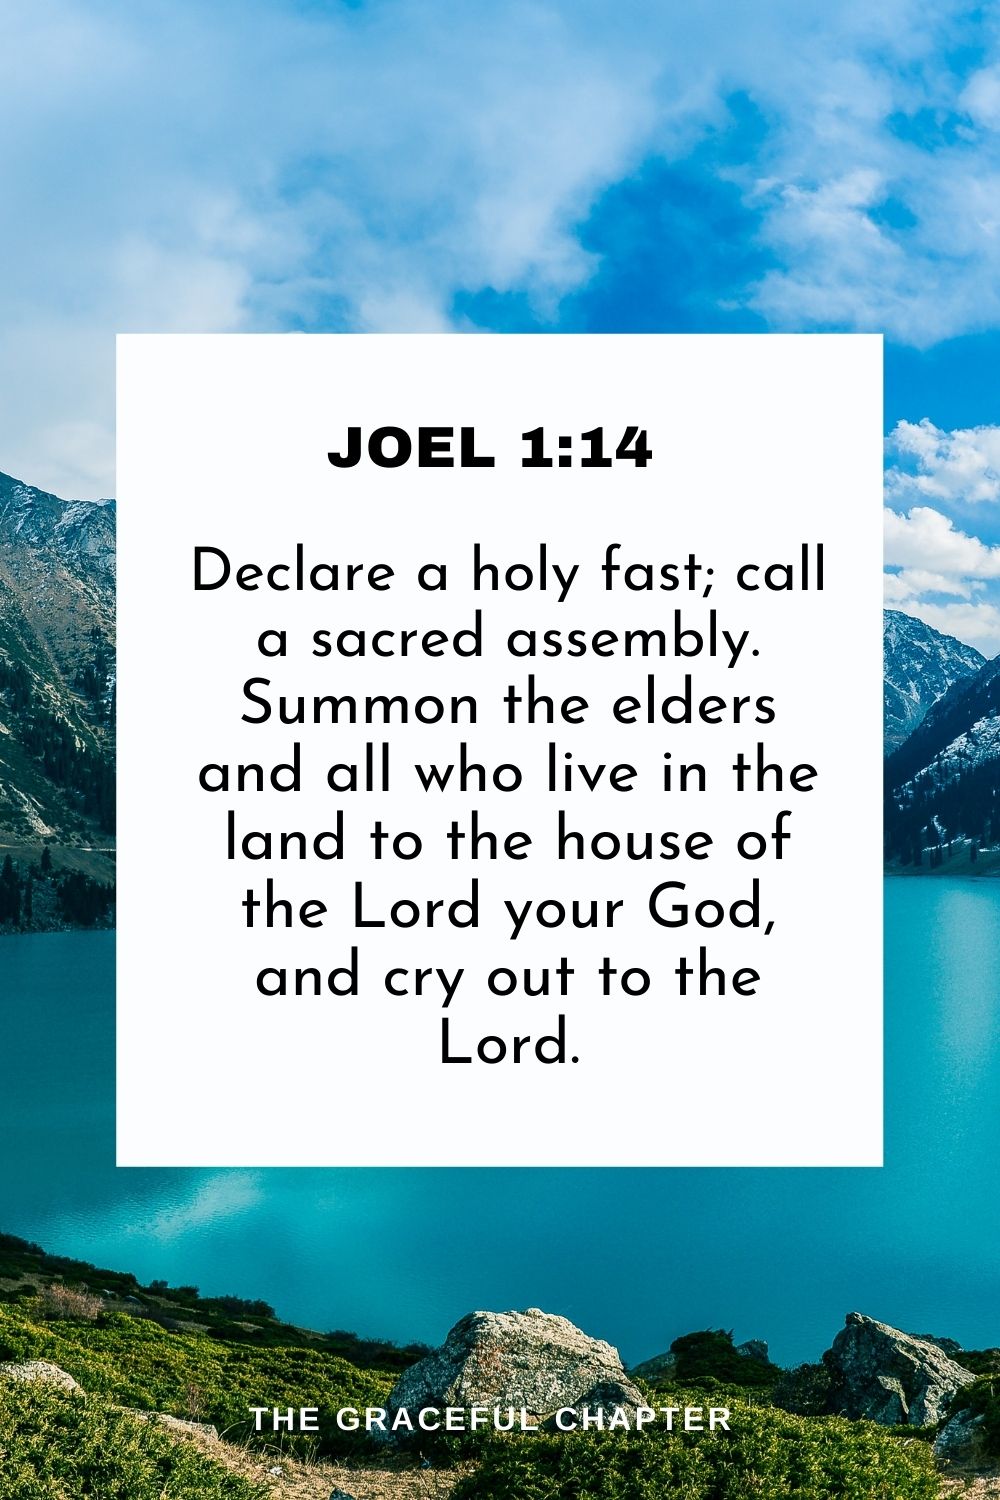 Declare a holy fast; call a sacred assembly. Summon the elders and all who live in the land to the house of the Lord your God, and cry out to the Lord. Joel 1:14